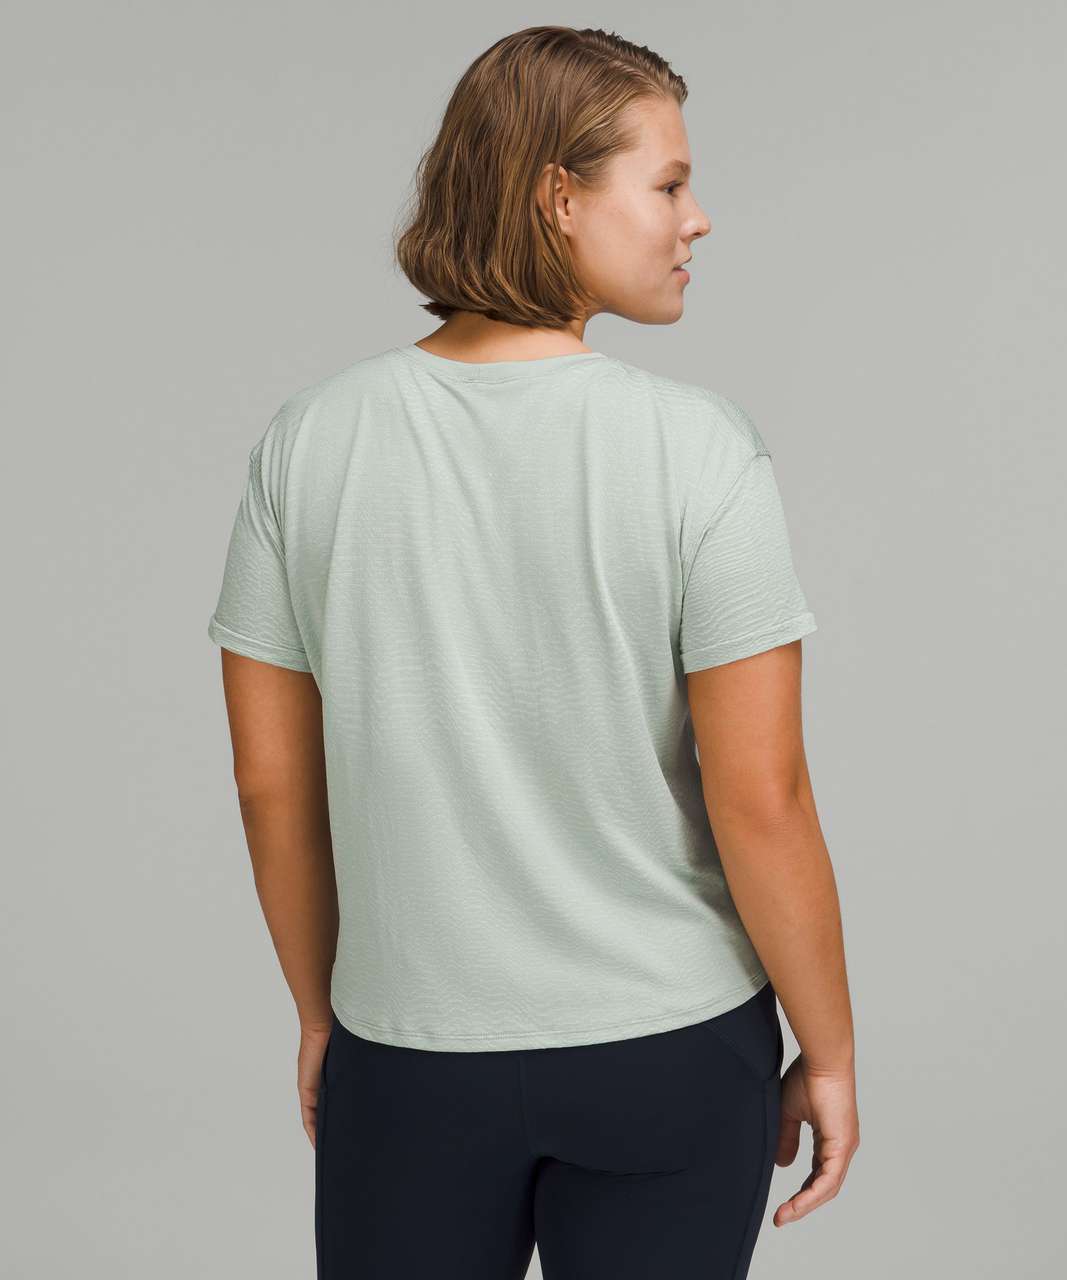 Lululemon Train to Be Seamless Short Sleeve T-Shirt - Ripple Wave Silver Blue / Delicate Mint